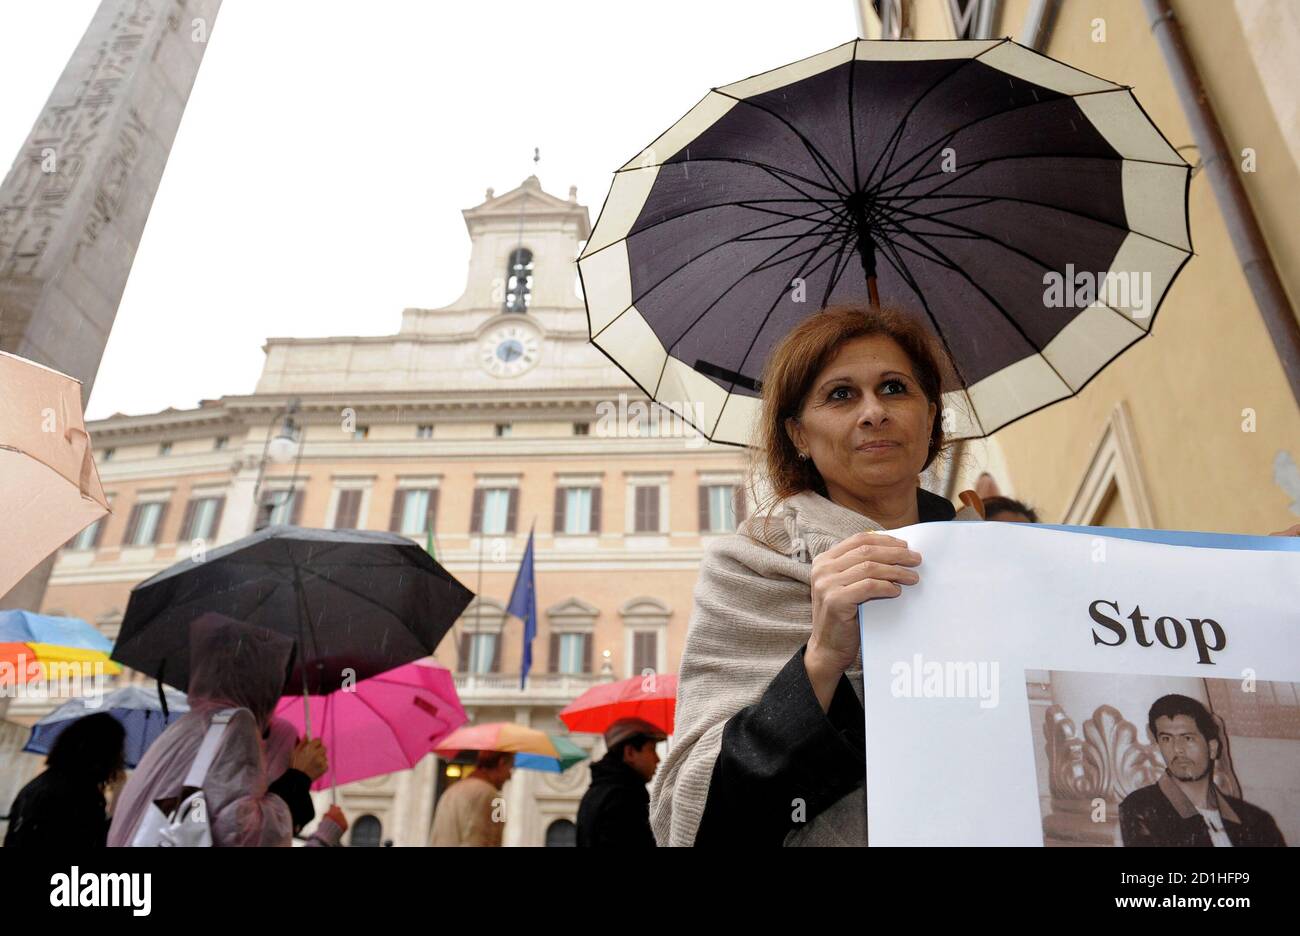 Souad Sbai, a lawmaker from the People of Freedom party, holds a banner during a demonstration for Sayed Perwiz Kambakhsh, an Afghan journalist who was arrested in 2007 after downloading material from the internet relating to the role of women in Islamic societies and given the death sentence for blasphemy, in Rome April 1, 2009. Souad Sbai spent years in Italy defending battered women in the Moroccan immigrant community before the death threats started coming. Now that she's a member of parliament, she wonders if they'll ever stop.      REUTERS/Alessandro Bianchi    (ITALY POLITICS CONFLICT) Stock Photo